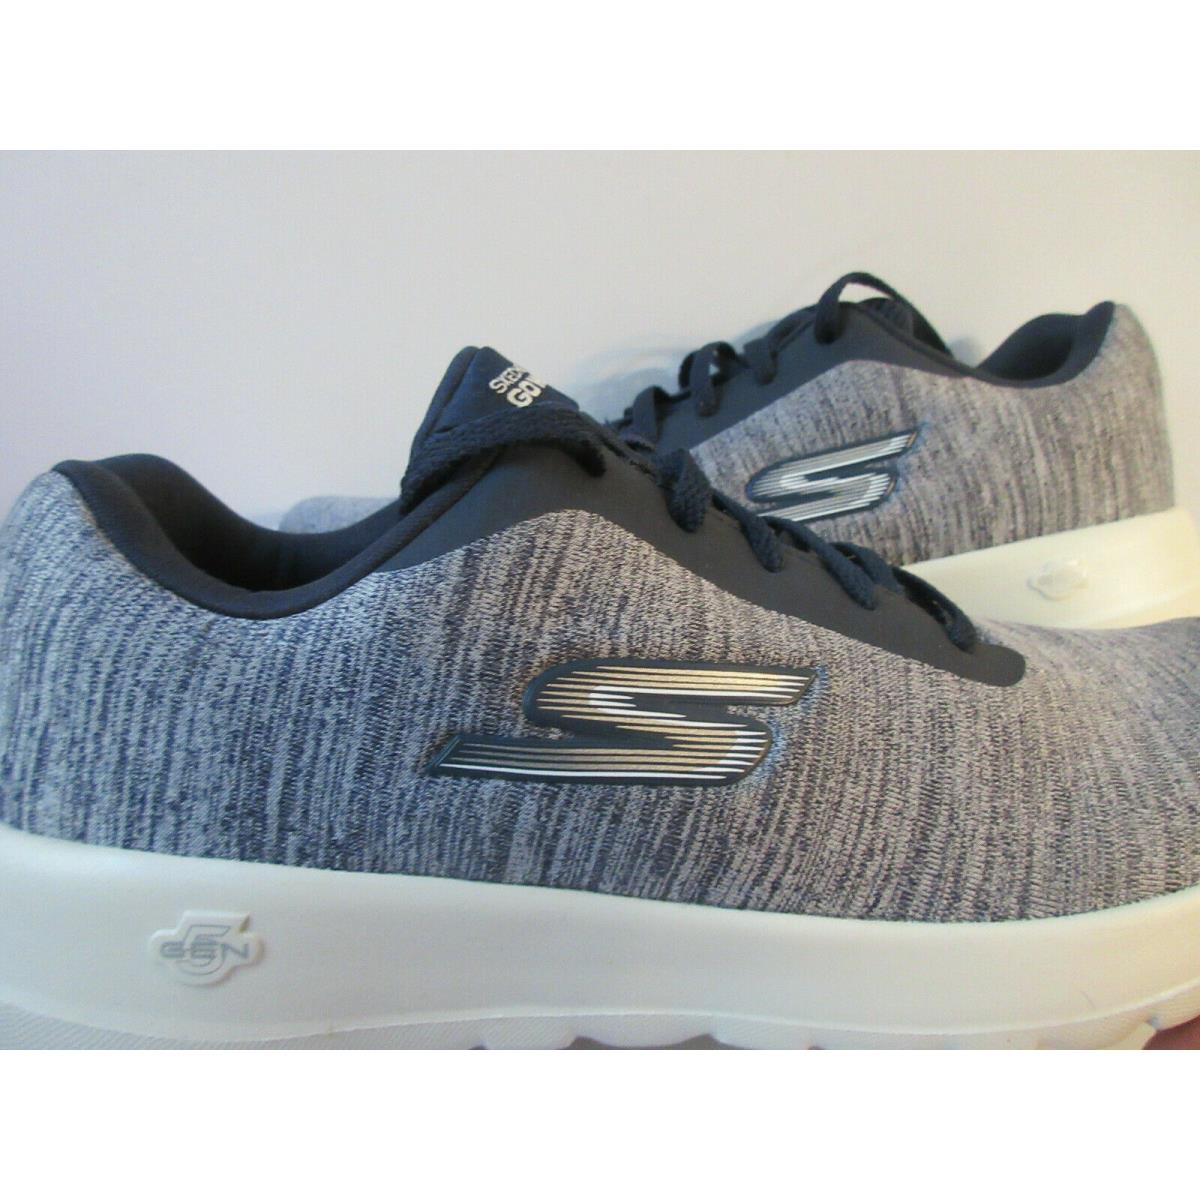 Skechers shoes Air Cooled GoGA Mat - Gray 8